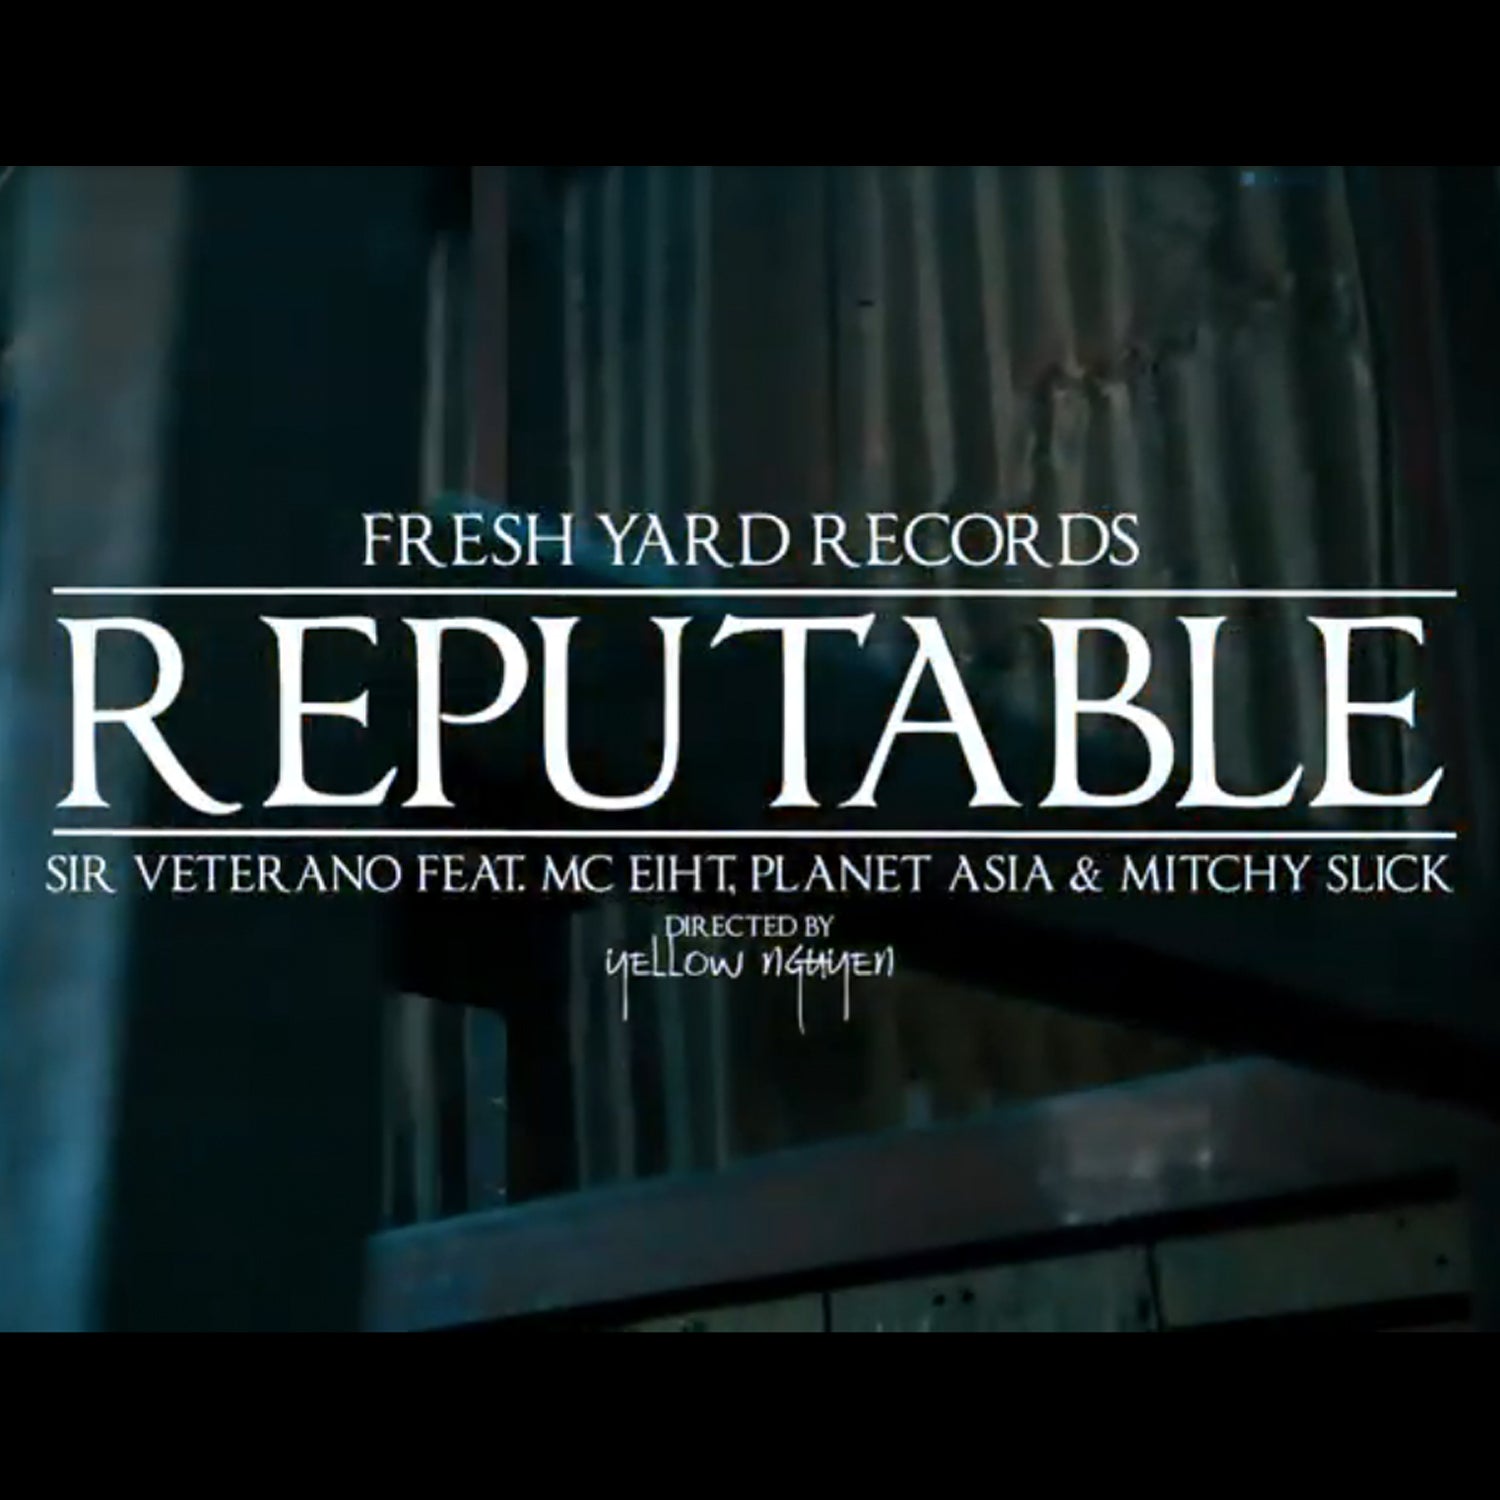 REPUTABLE Music Video Out Now